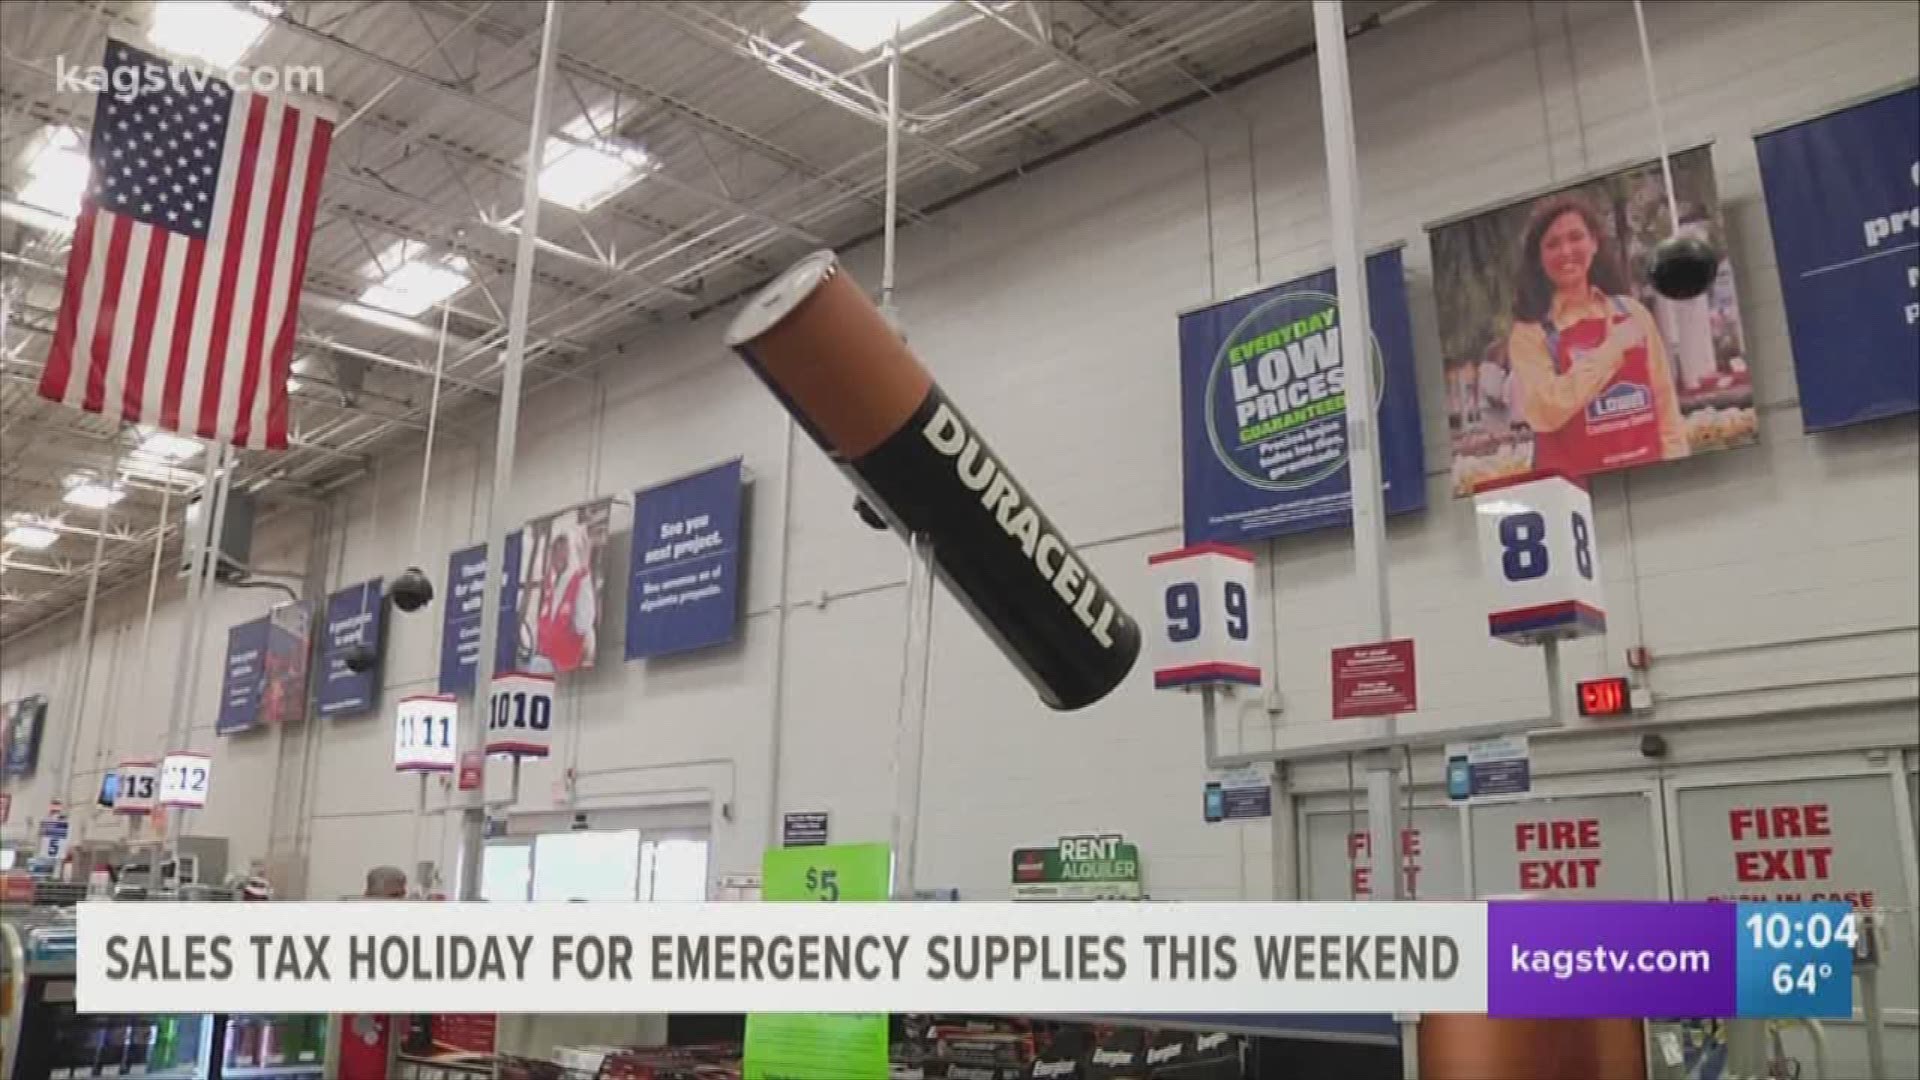 Hurricane season begins on June 1st and to help the public prepare, FEMA and the Texas State Comptroller announced that  beginning this Saturday, April 28th, until midnight on Monday, April 30th, qualifying emergency preparation supplies can be purchased